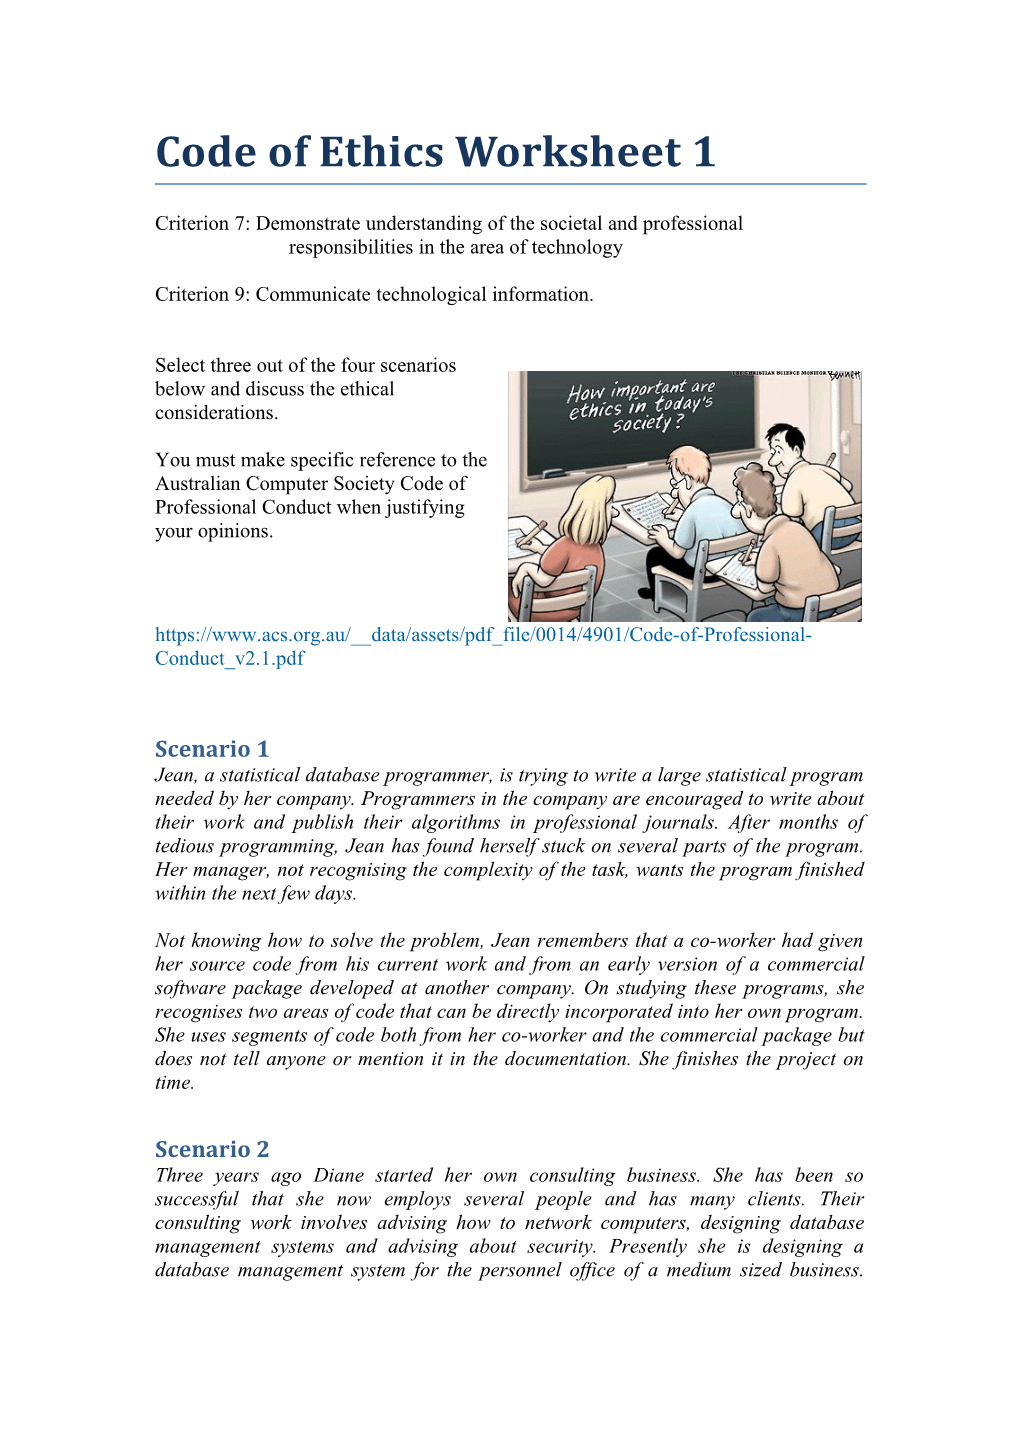 Criterion 7: Demonstrate Understanding of the Societal and Professional Responsibilities